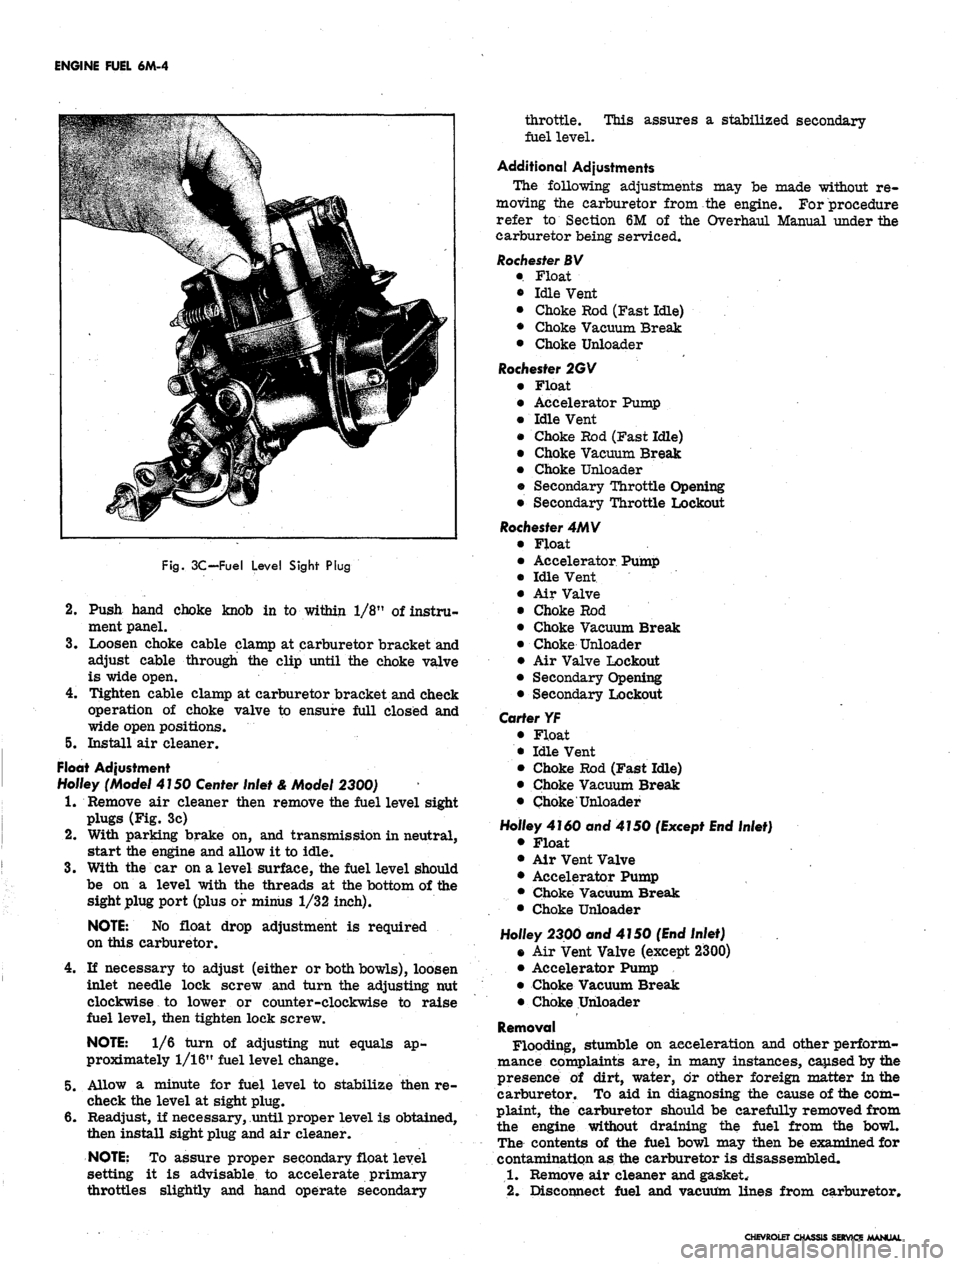 CHEVROLET CAMARO 1967 1.G Chassis Workshop Manual 
ENGINE FUEL 6M-4

Fig.
 3C-Fuel Level Sight Plug

2.
 Push hand choke knob in to within 1/8" of instru-

ment panel.

3.
 Loosen choke cable clamp at carburetor bracket and

adjust cable through the 